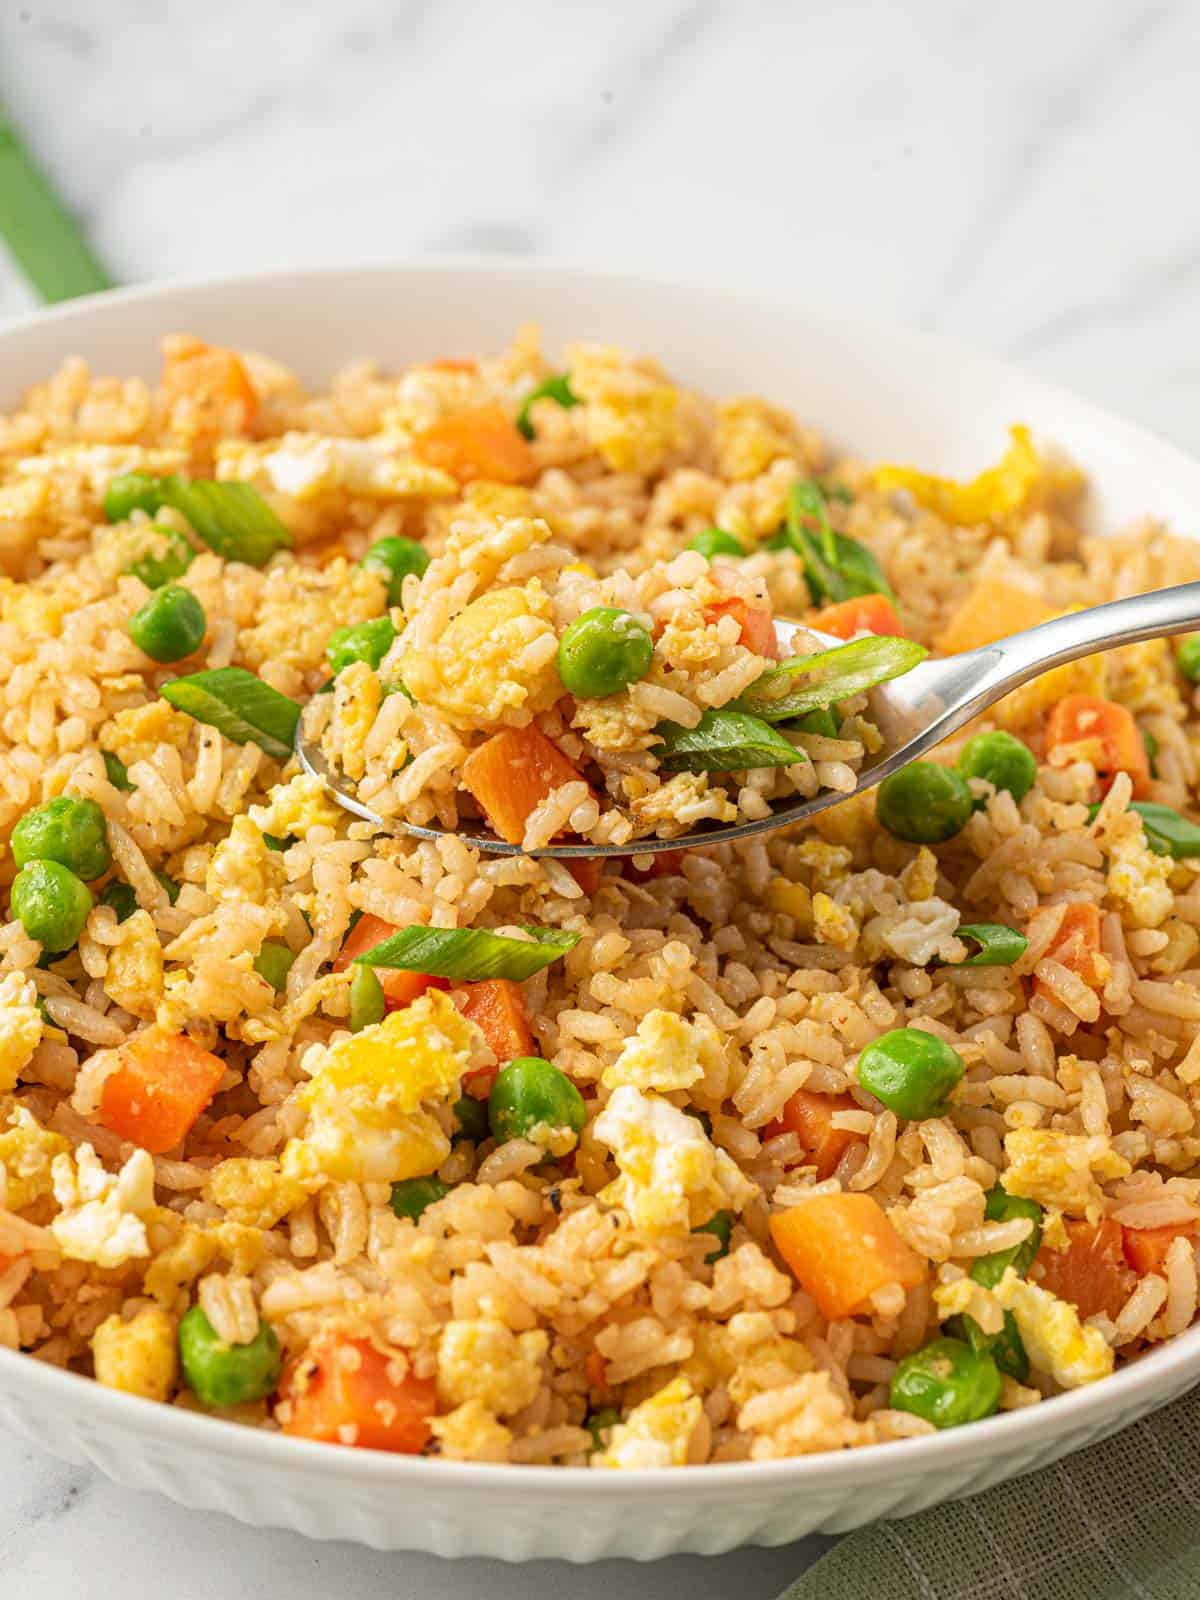 A spoon full of Chinese vegetarian fried rice over a bowl.